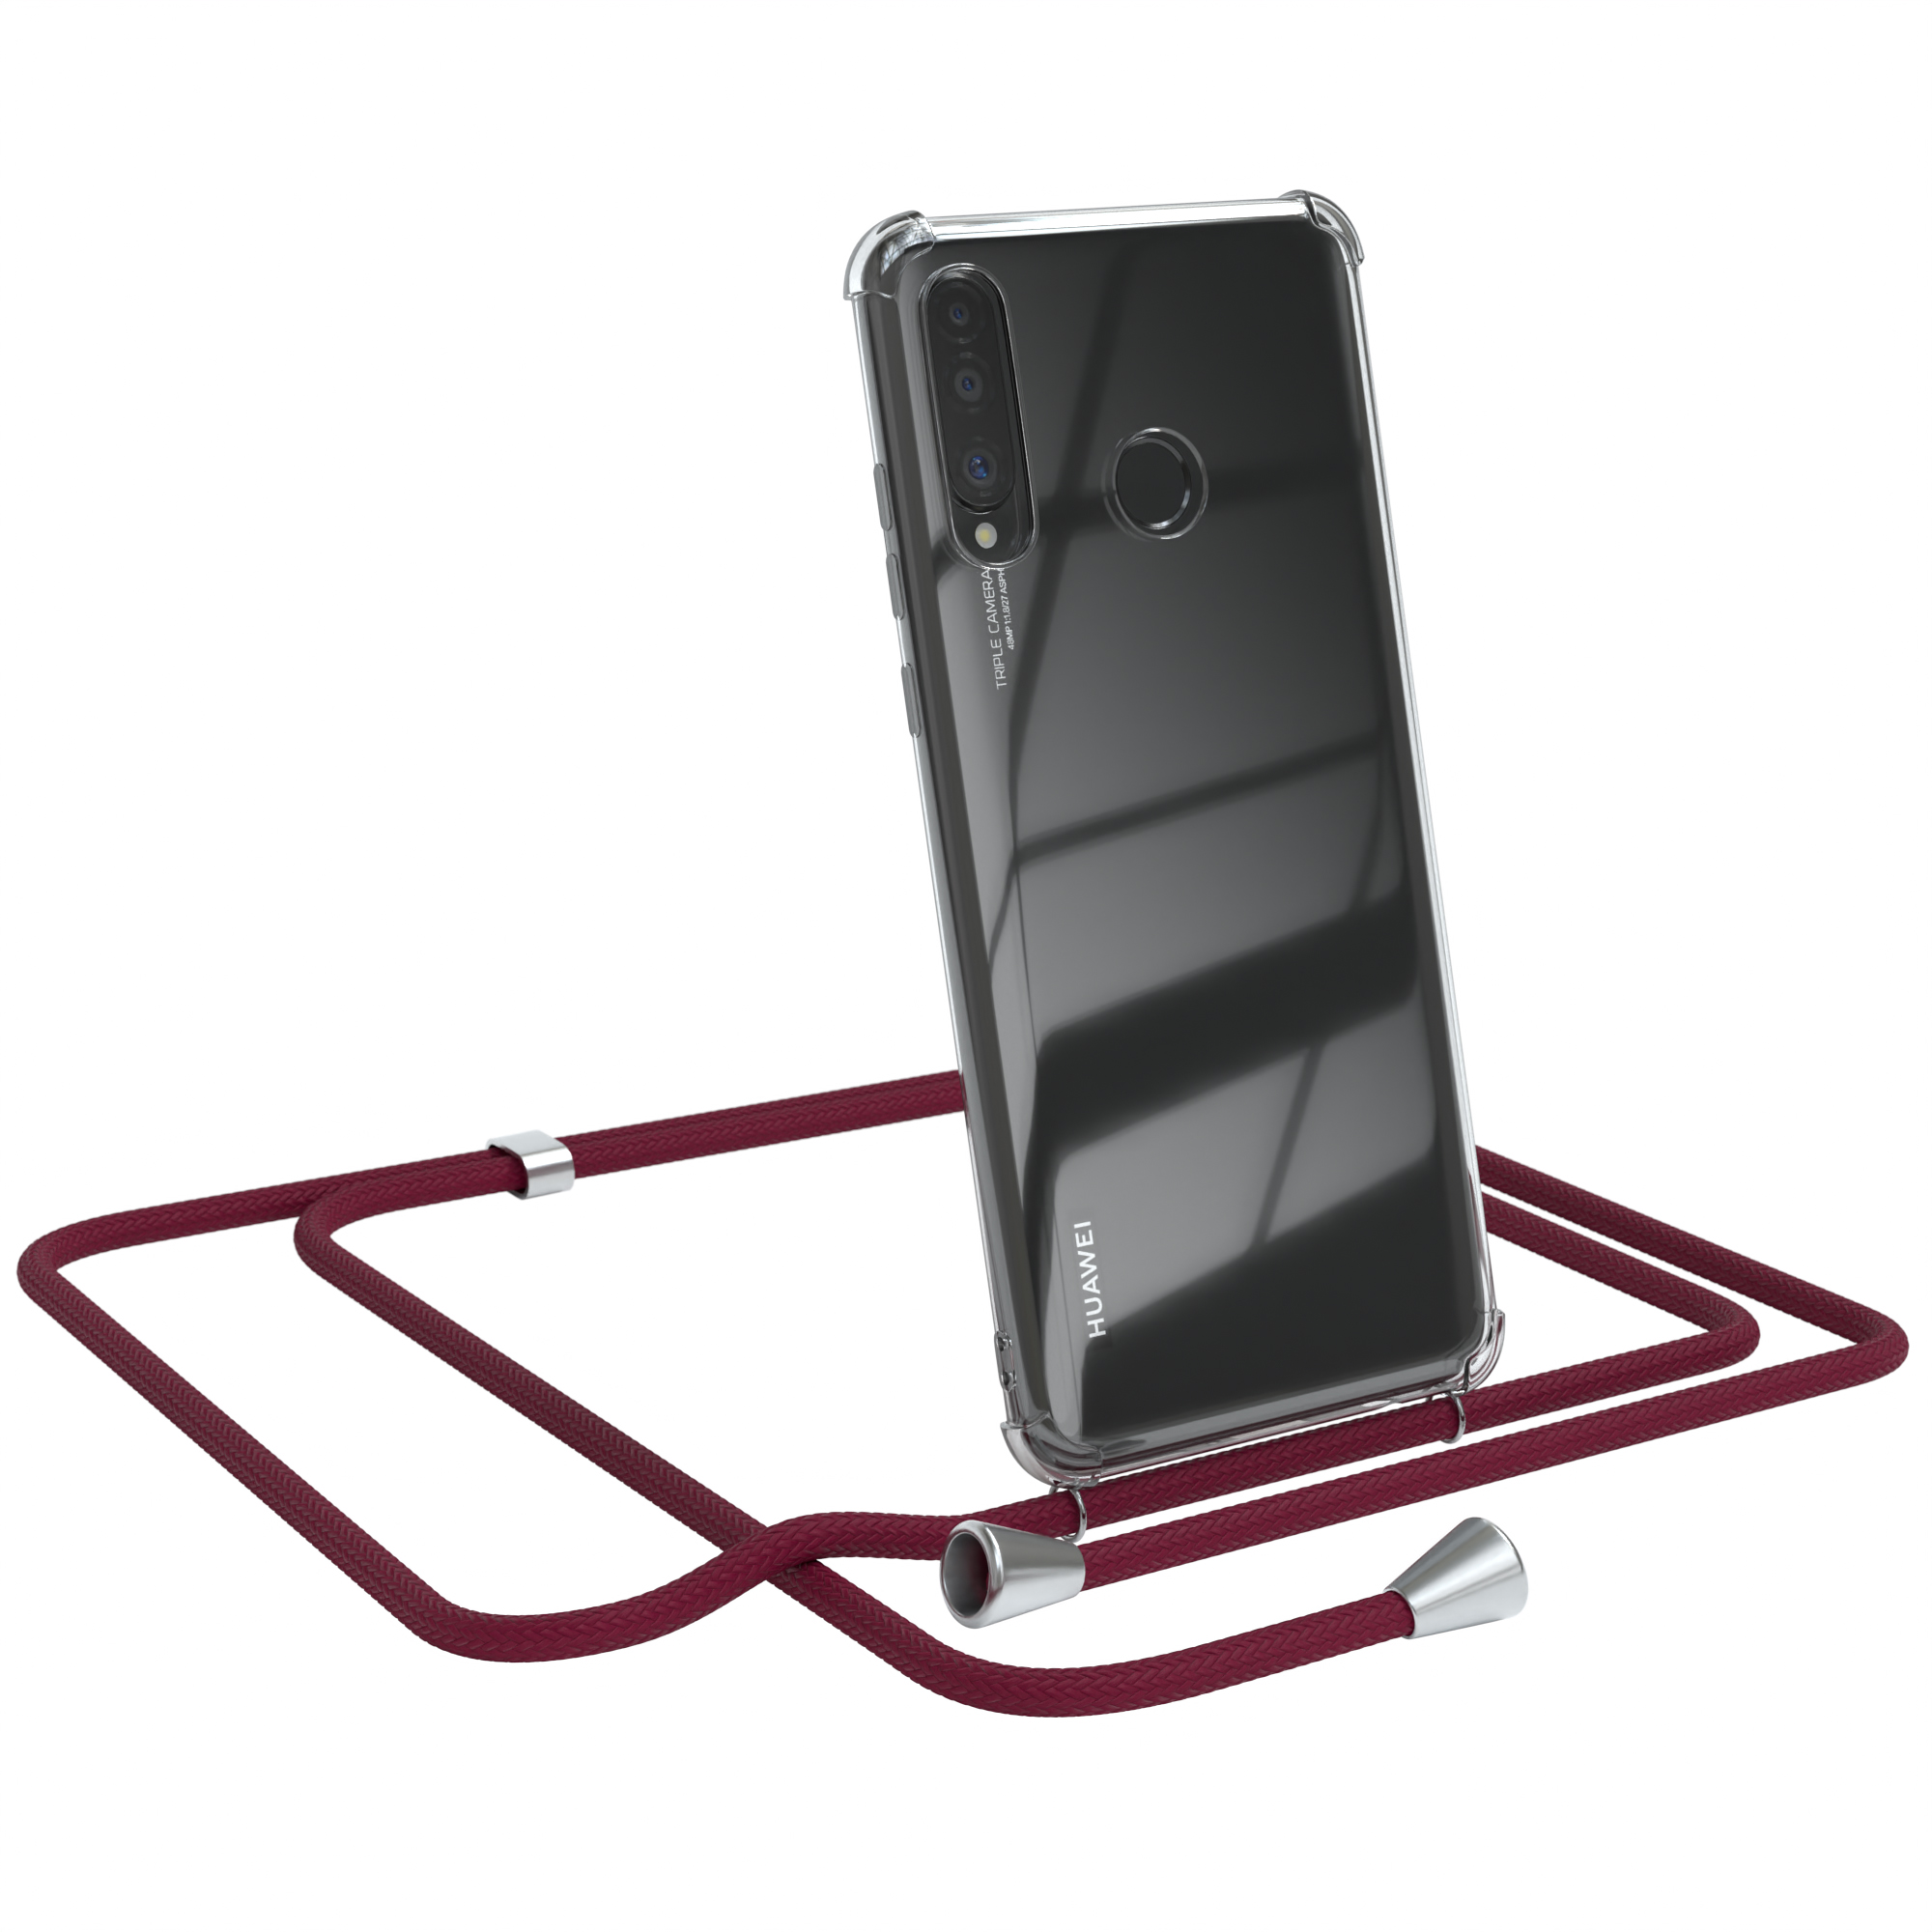 EAZY CASE Clear Cover mit P30 Umhängeband, Silber Huawei, Clips / Umhängetasche, Rot Bordeaux Lite